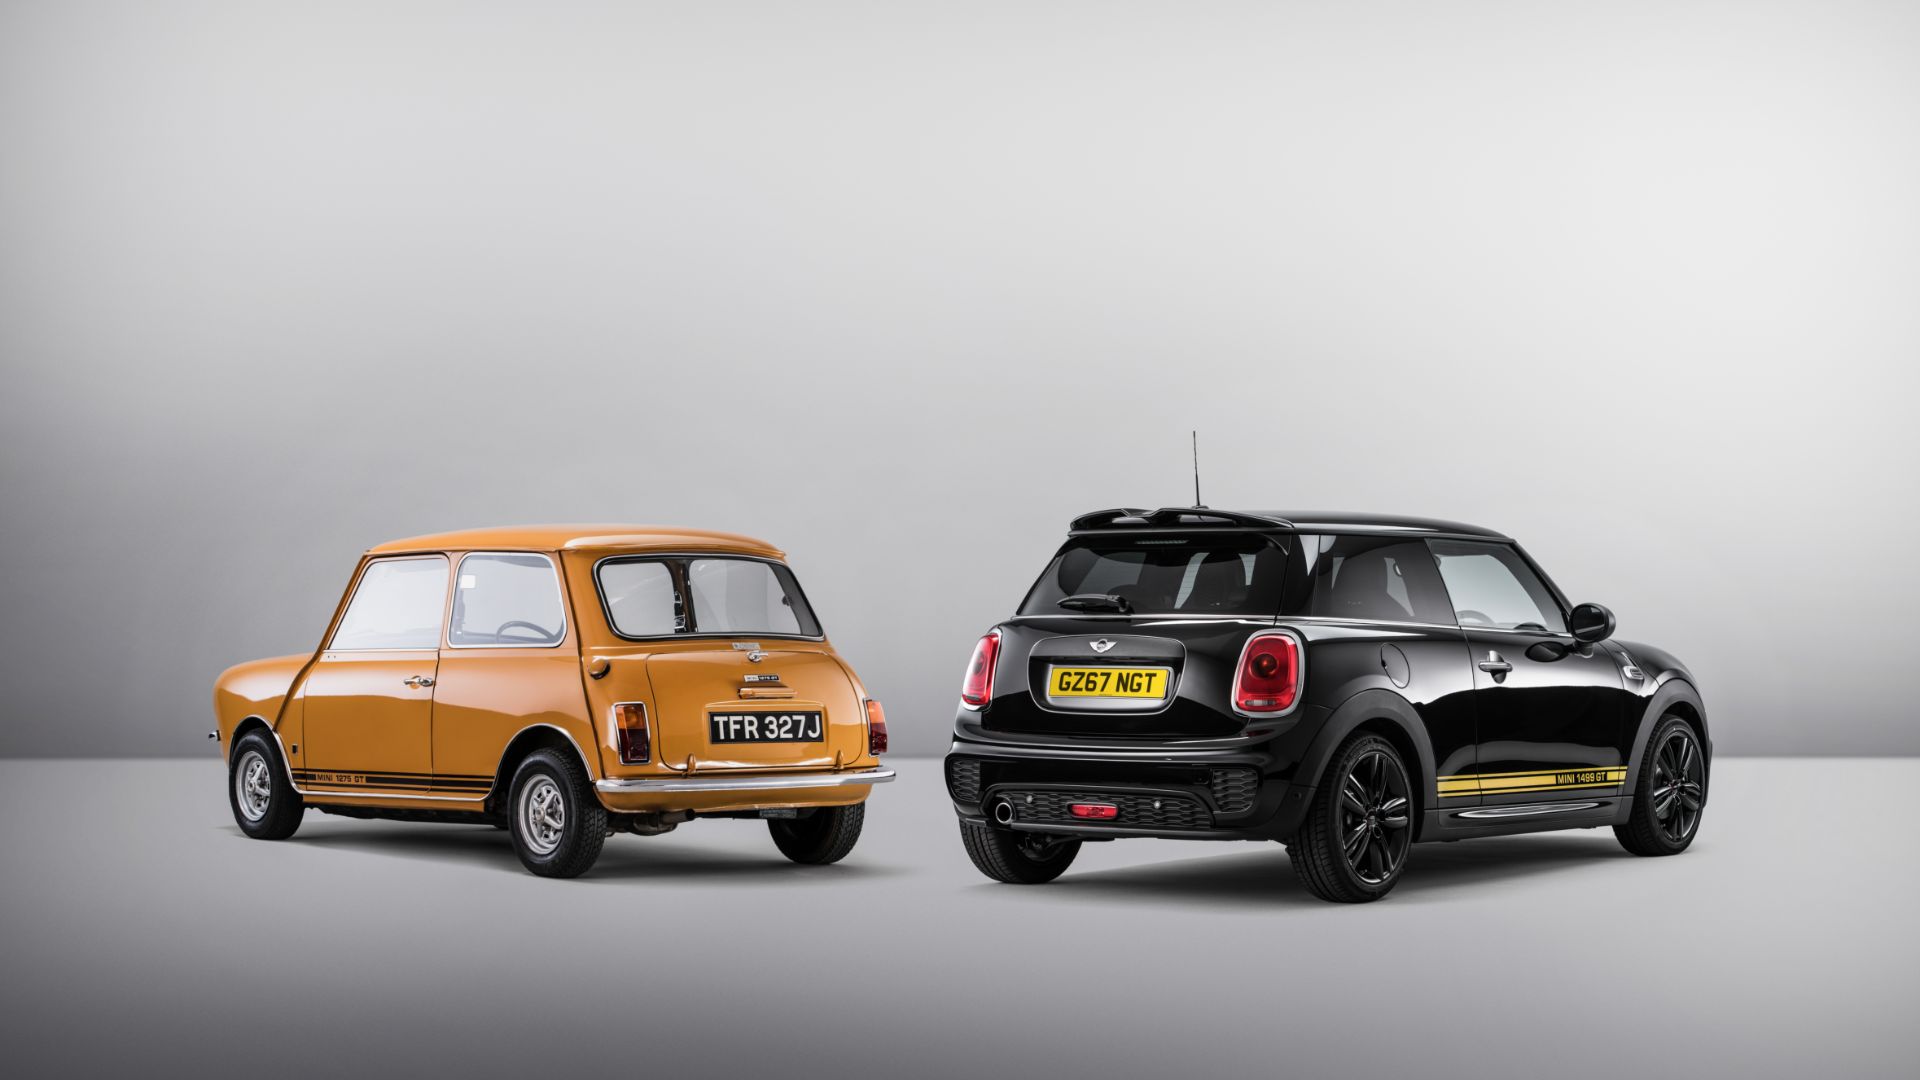 Minis more affordable now than in 1959